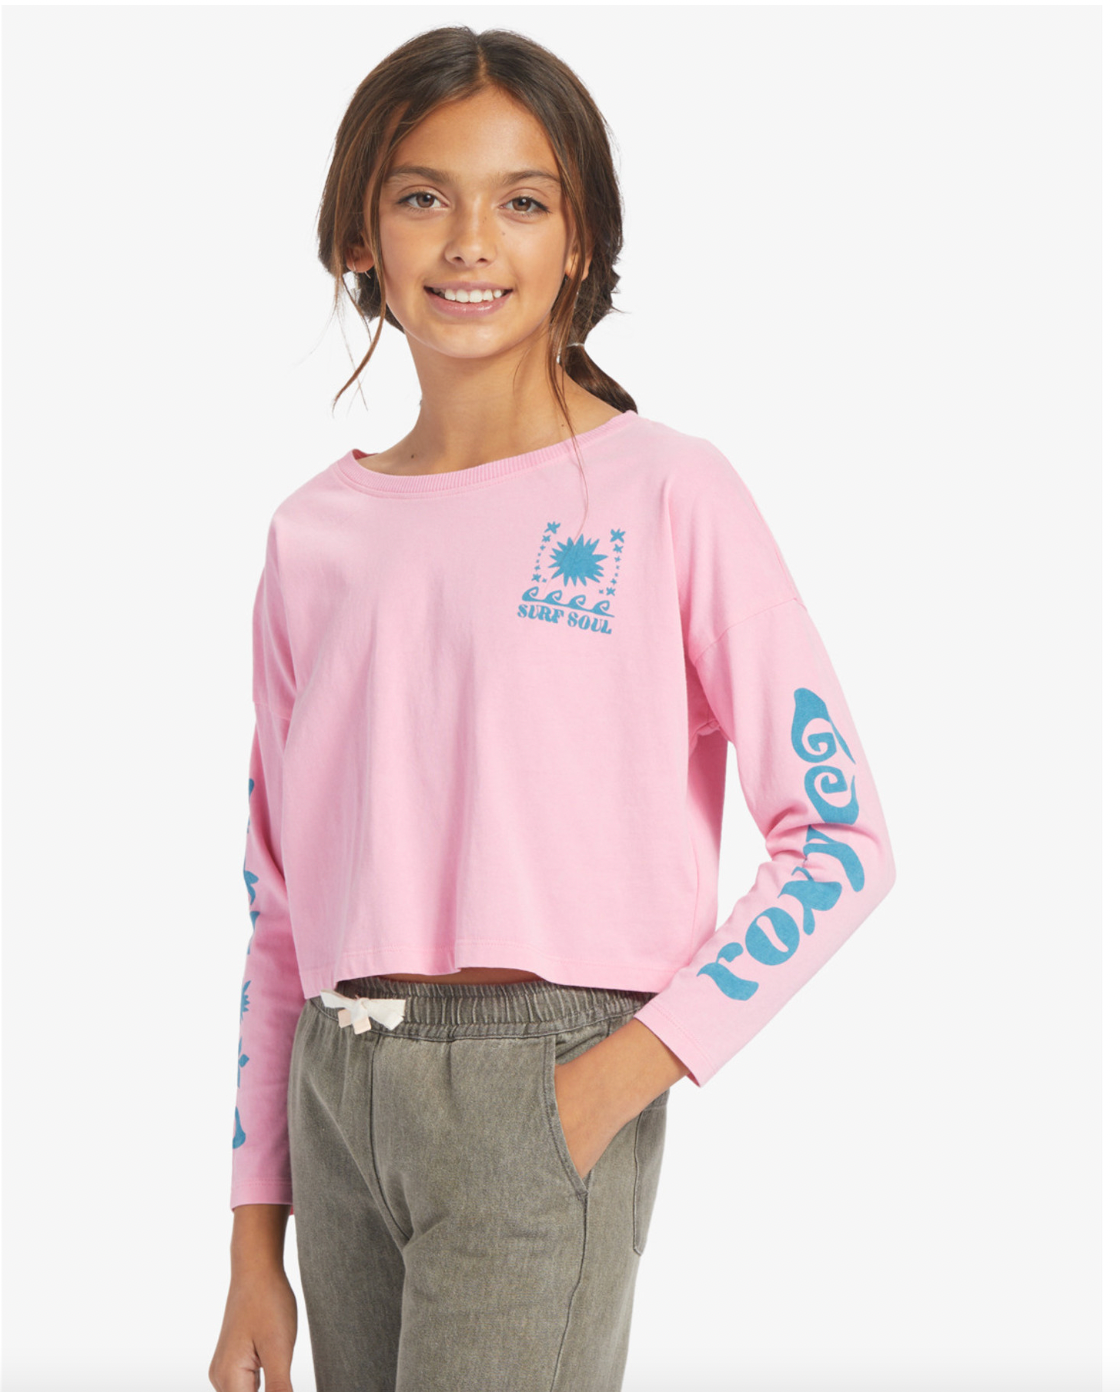 ROXY ALL YOU NEVER SAY LONG SLEEVE TEE GIRLS IN SACHET PINK